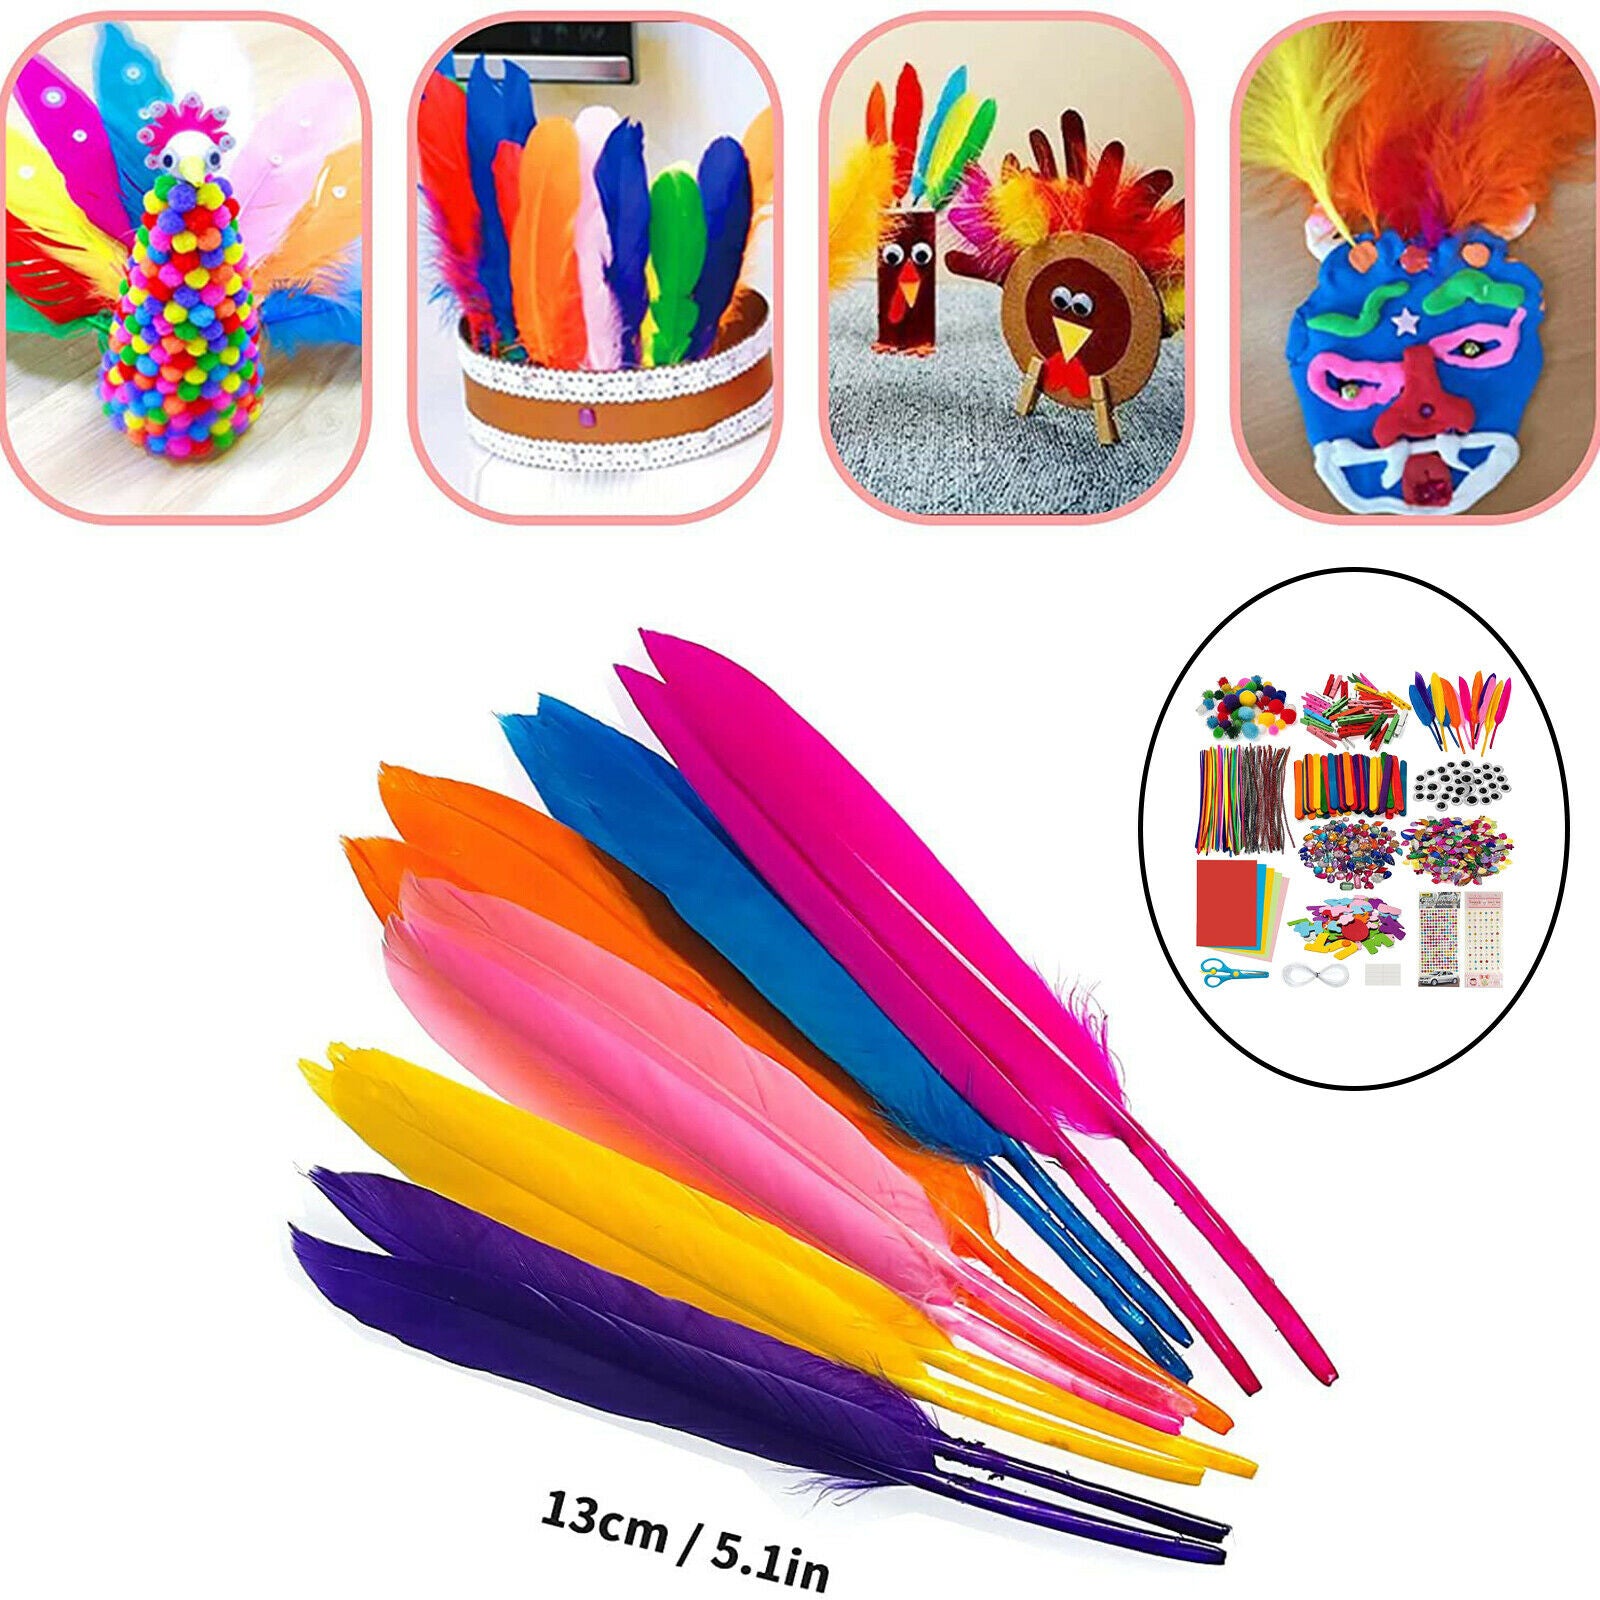 Arts and Crafts Supplies Set for Kids Activity for Toddlers Crafting Set